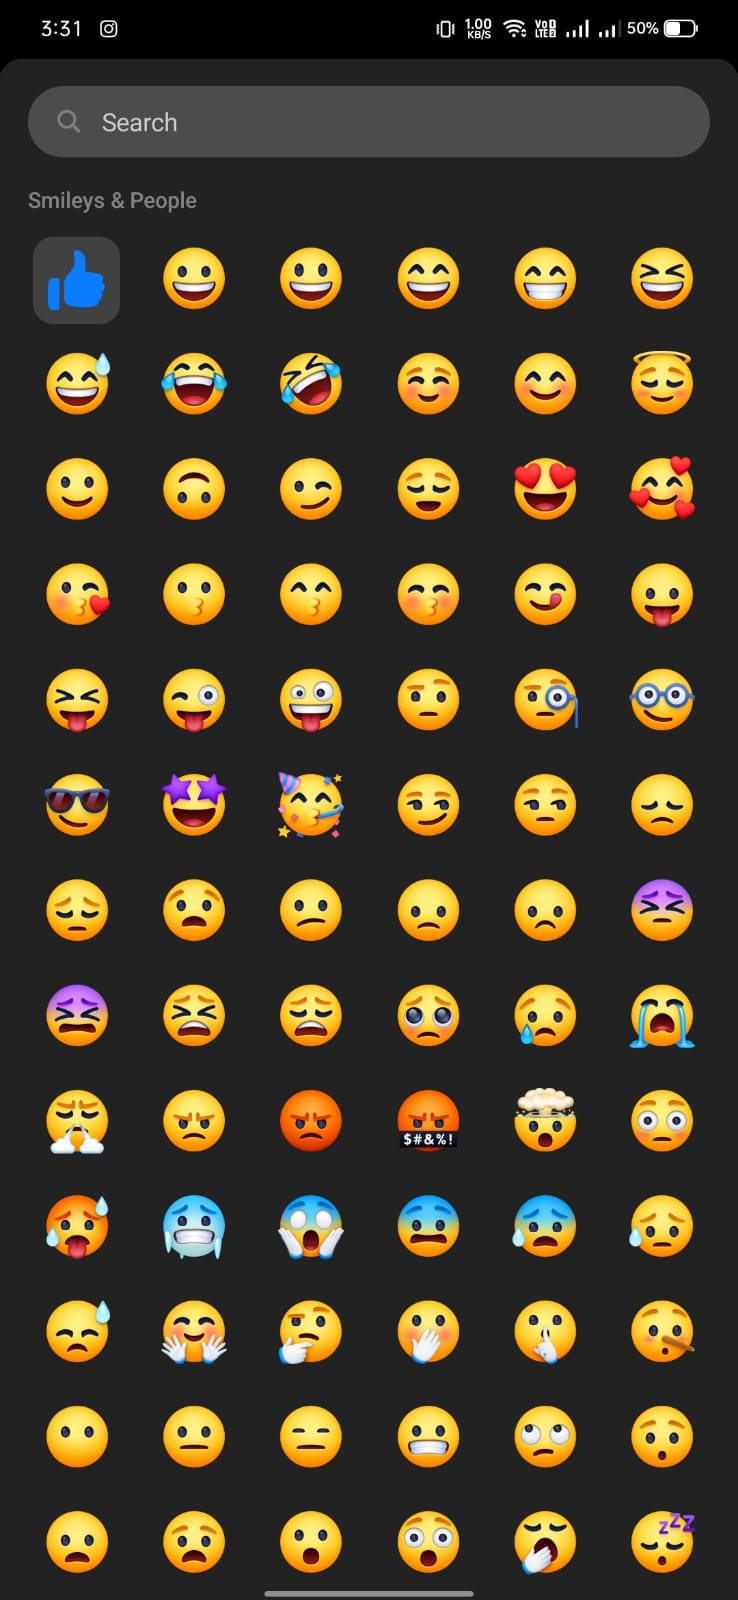 custome emoji - How to Change the Thumbs Up Icon in Facebook Chat